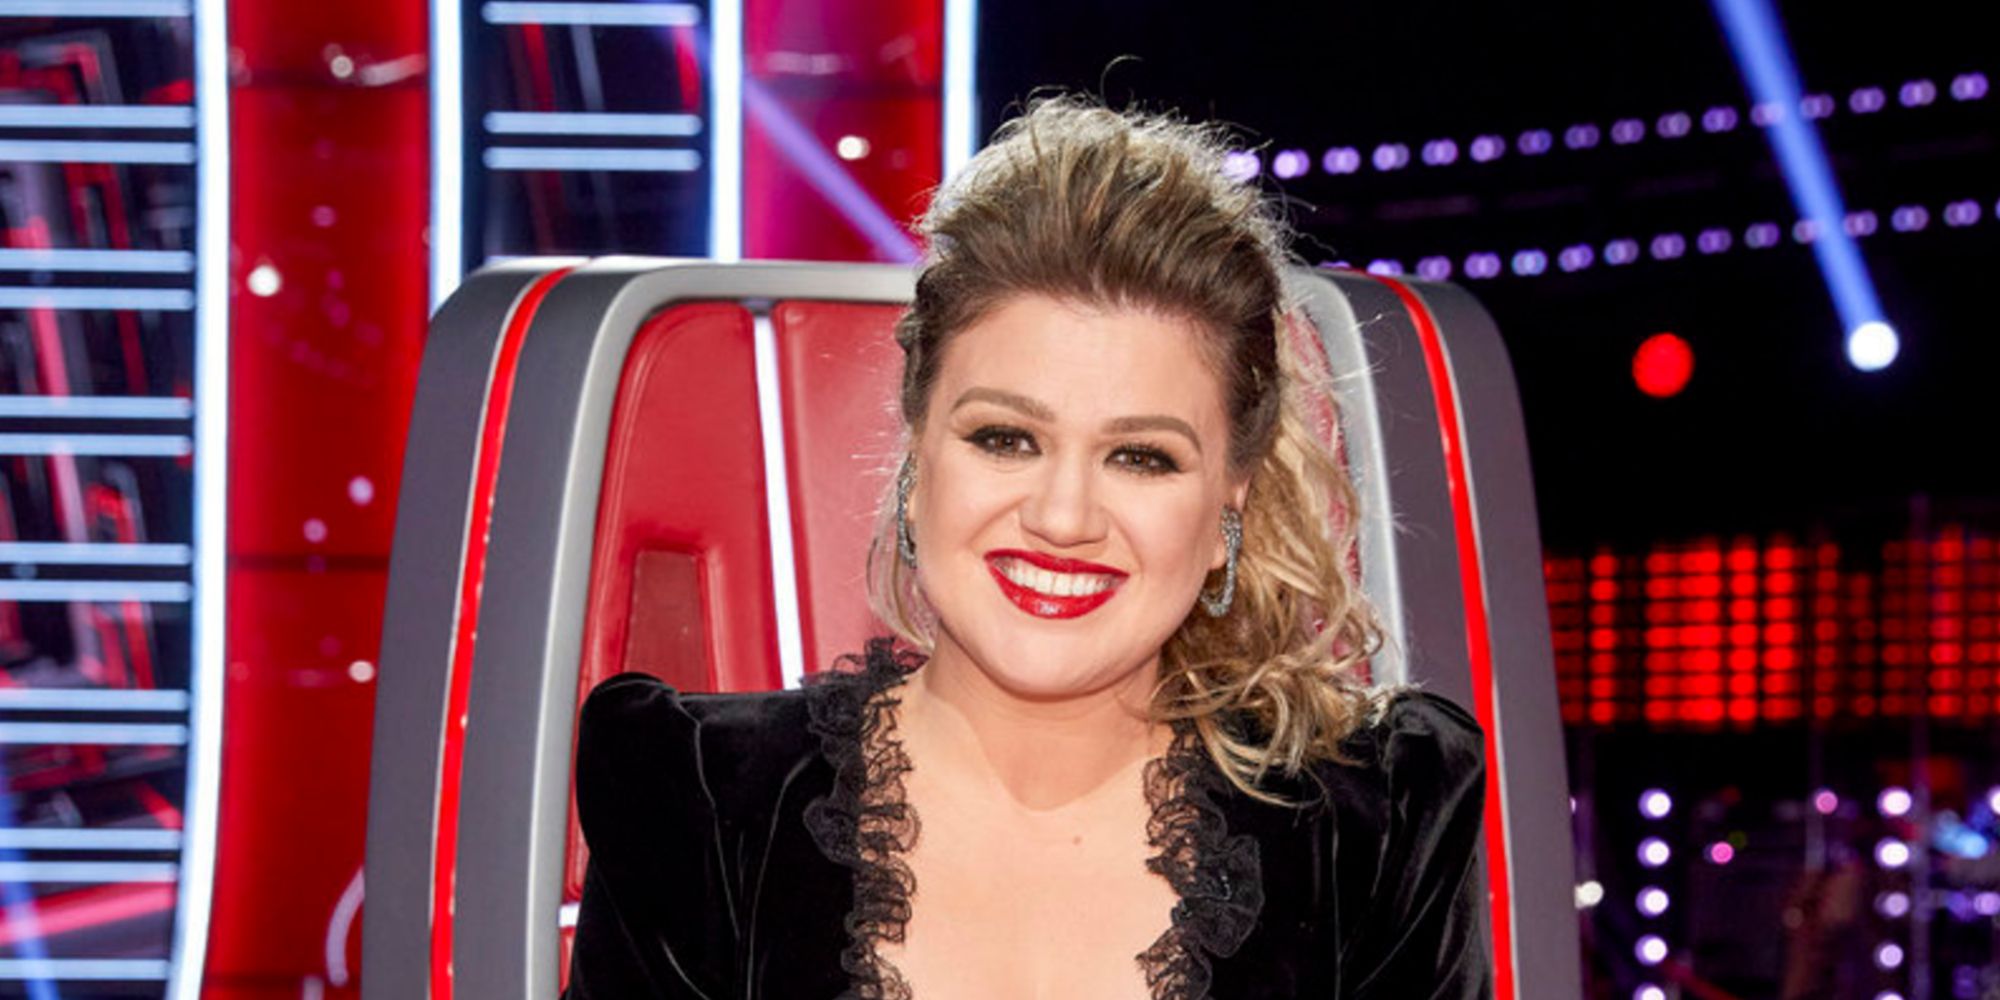 Kelly Clarkson on The Voice season 20 red chair